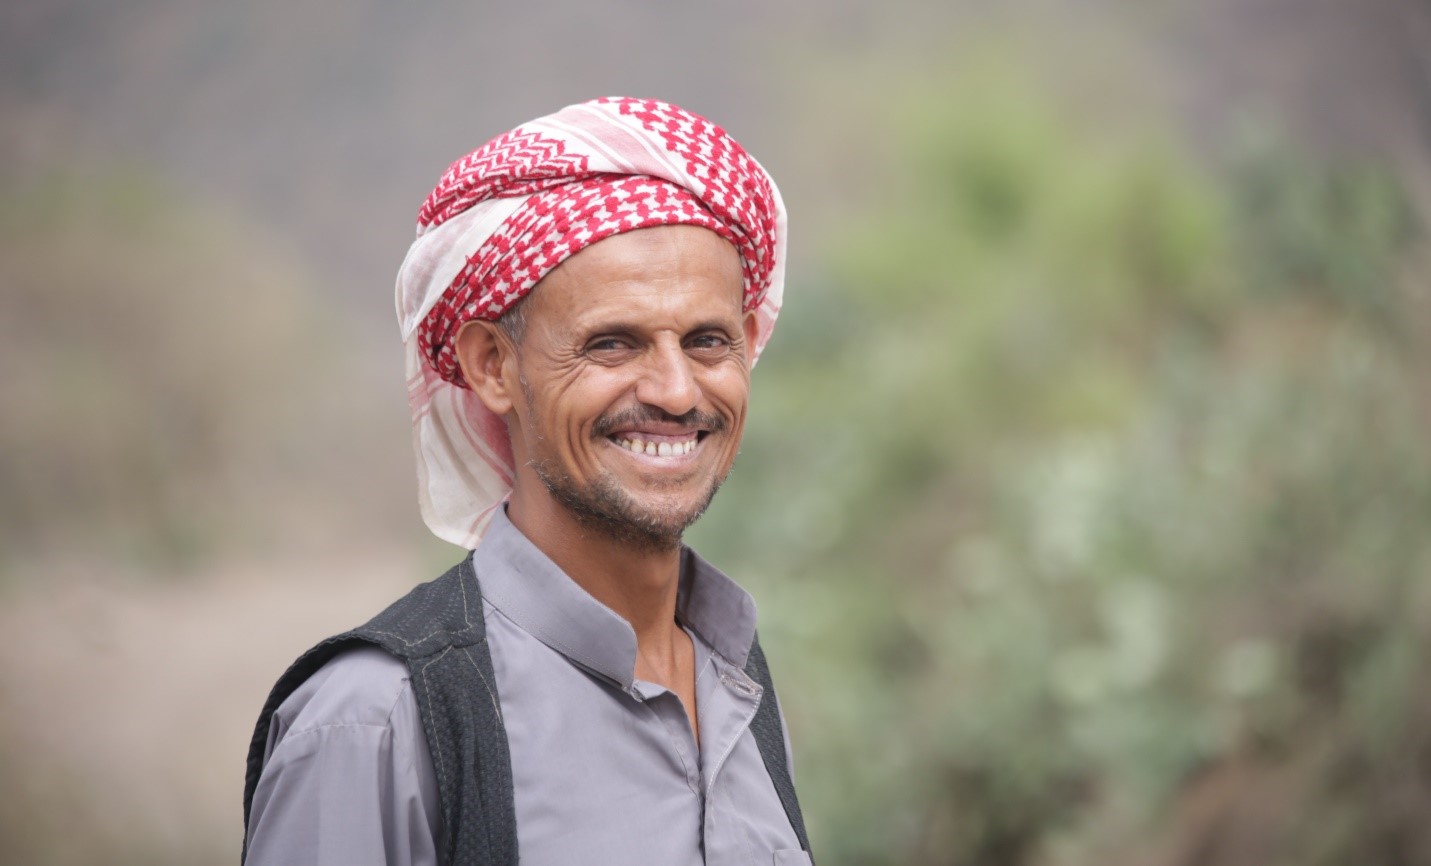 A man with a red and white headscarf smiling